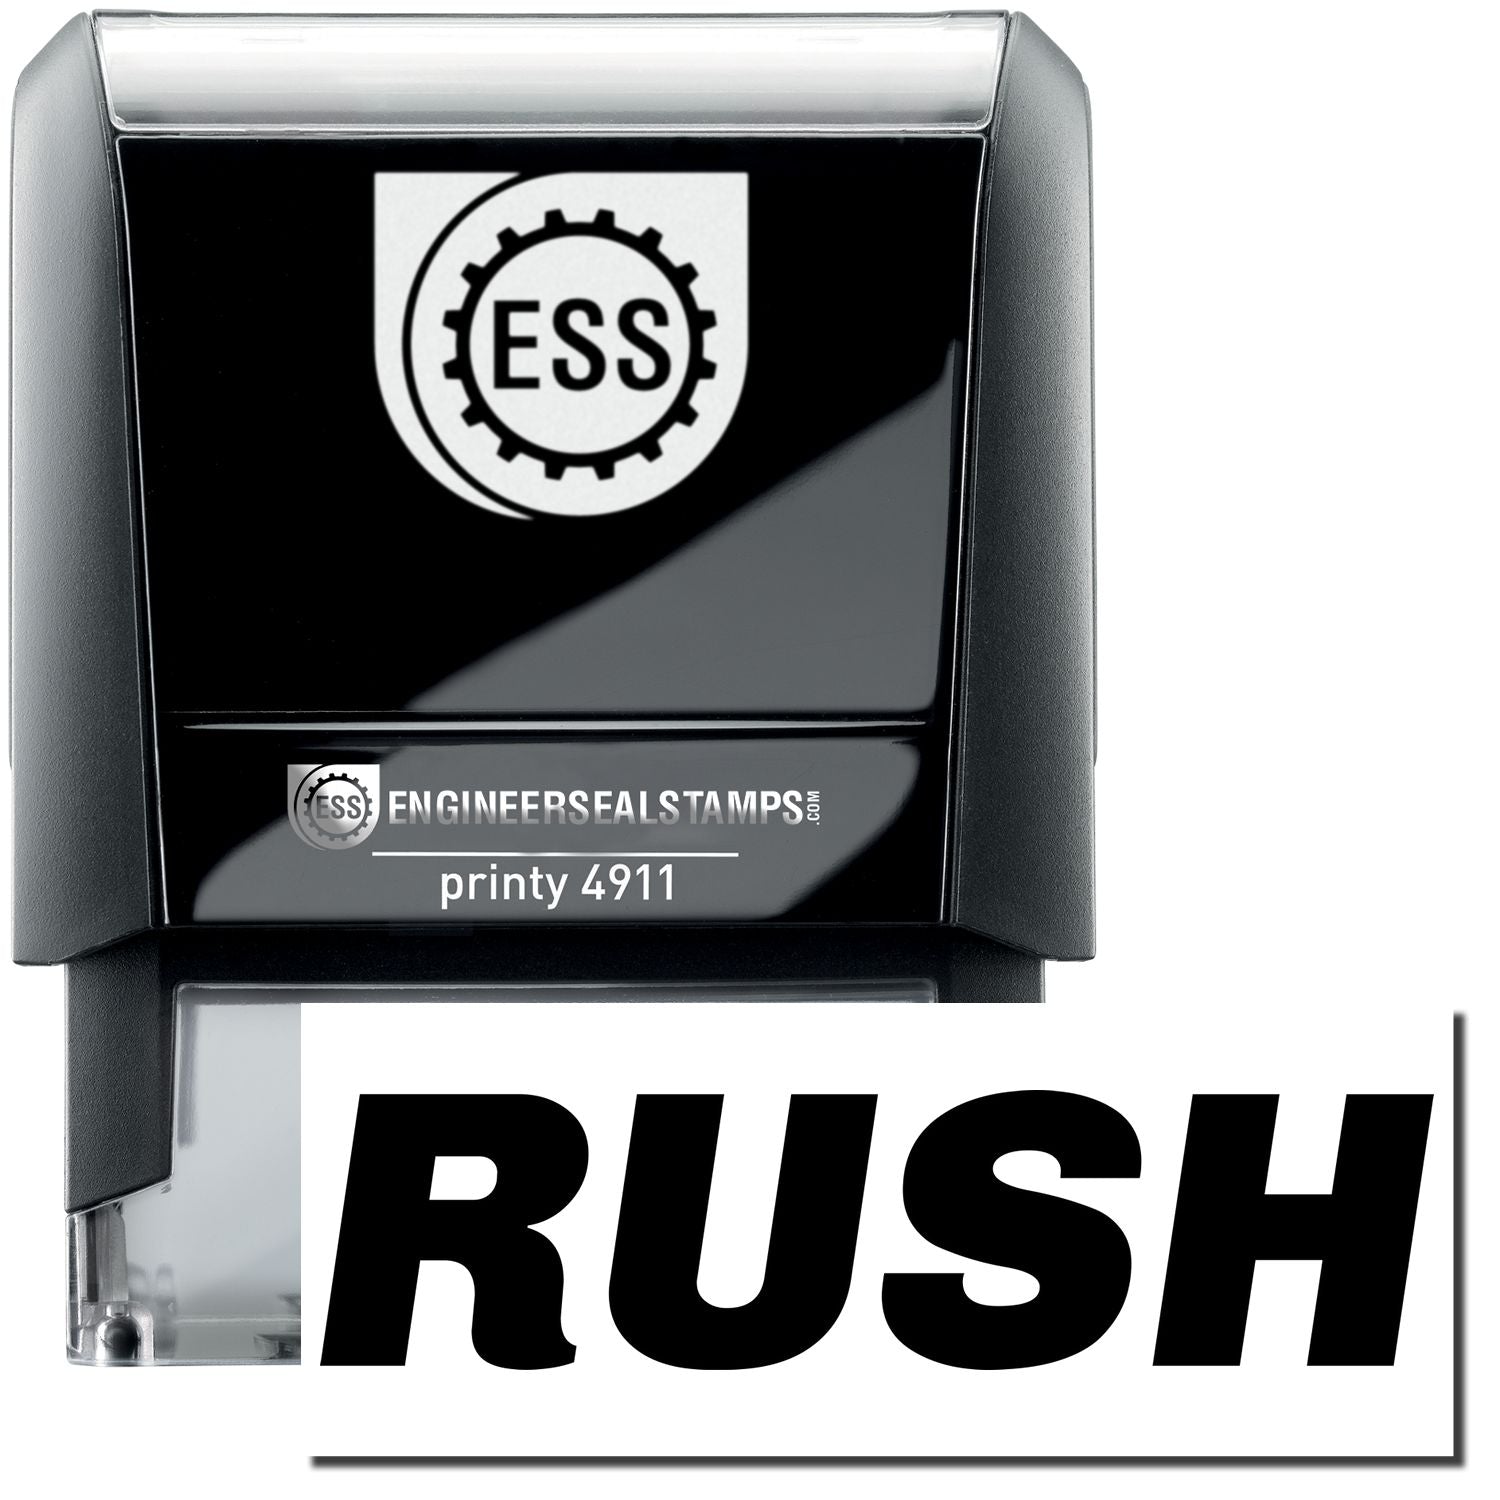 A self-inking stamp with a stamped image showing how the text "RUSH" in an italic font is displayed after stamping.